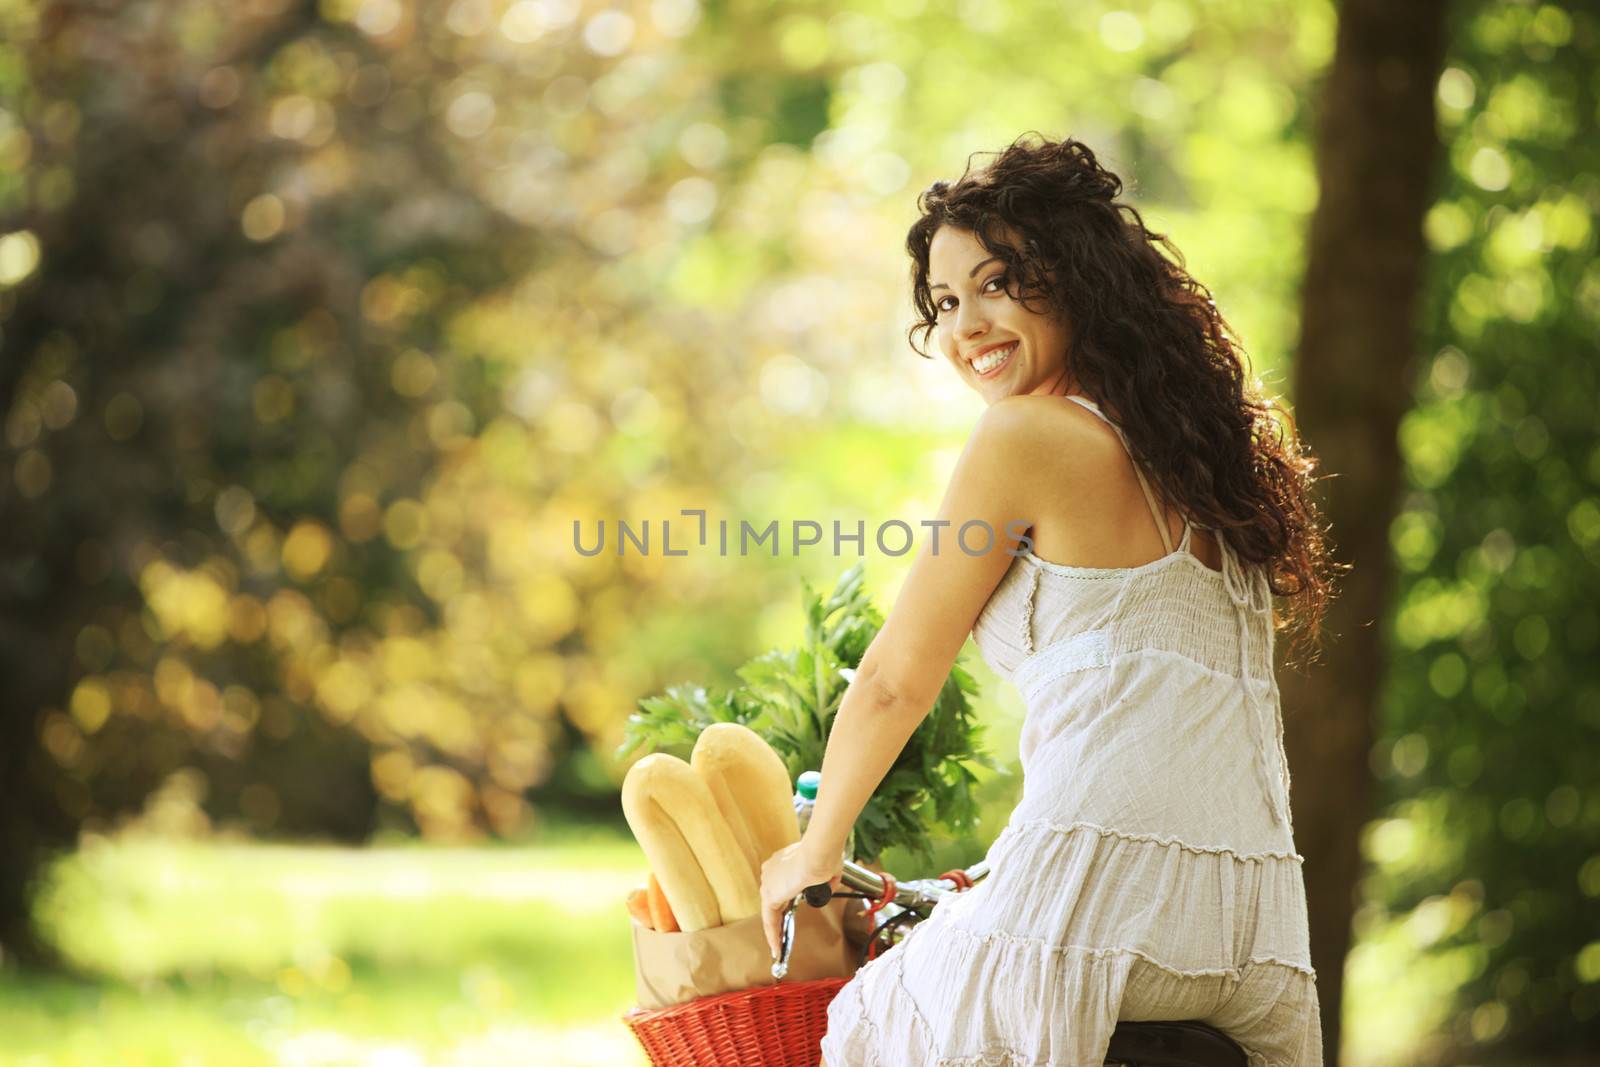 Portrait of a smiling young woman riding bicycle with groceries in basket